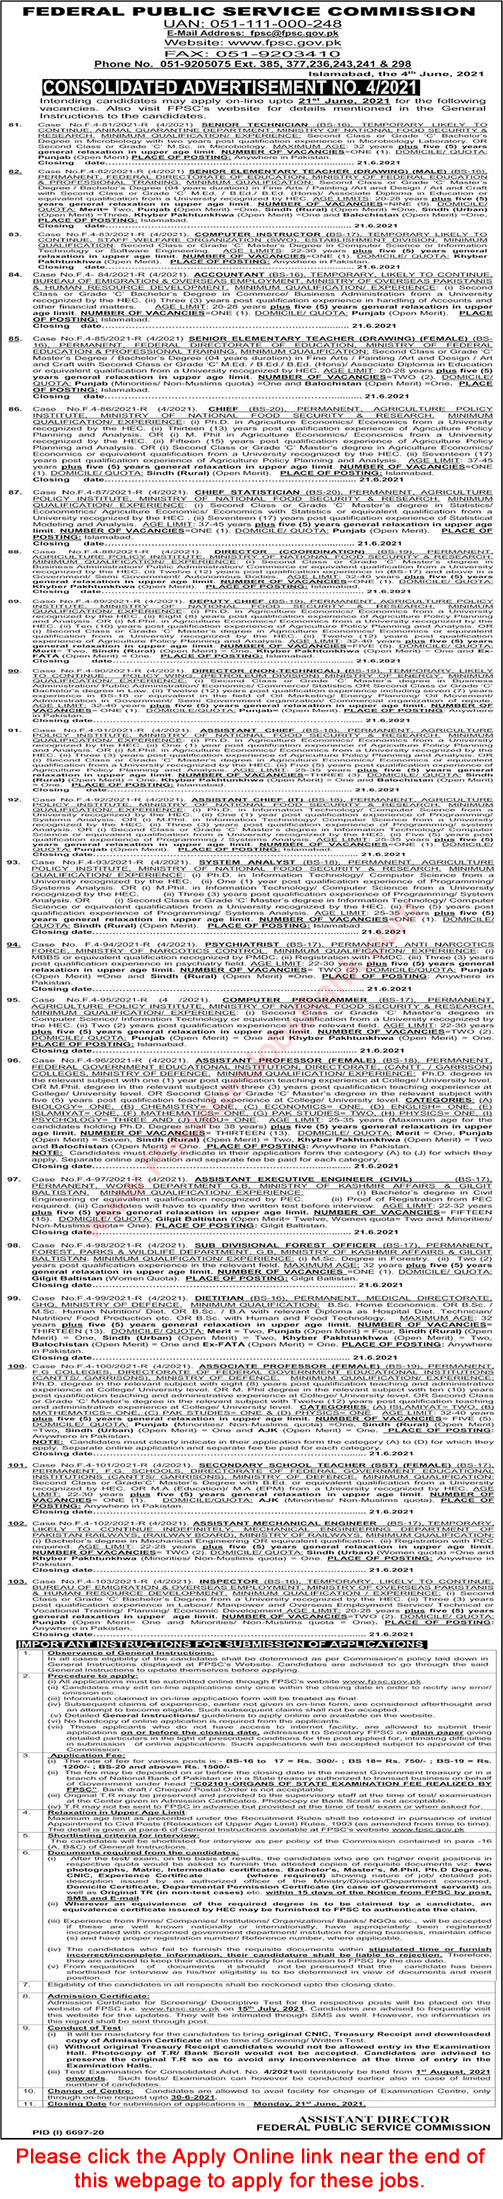 FPSC Jobs June 2021 Apply Online Consolidated Advertisement No 04/2021 4/2021 Latest